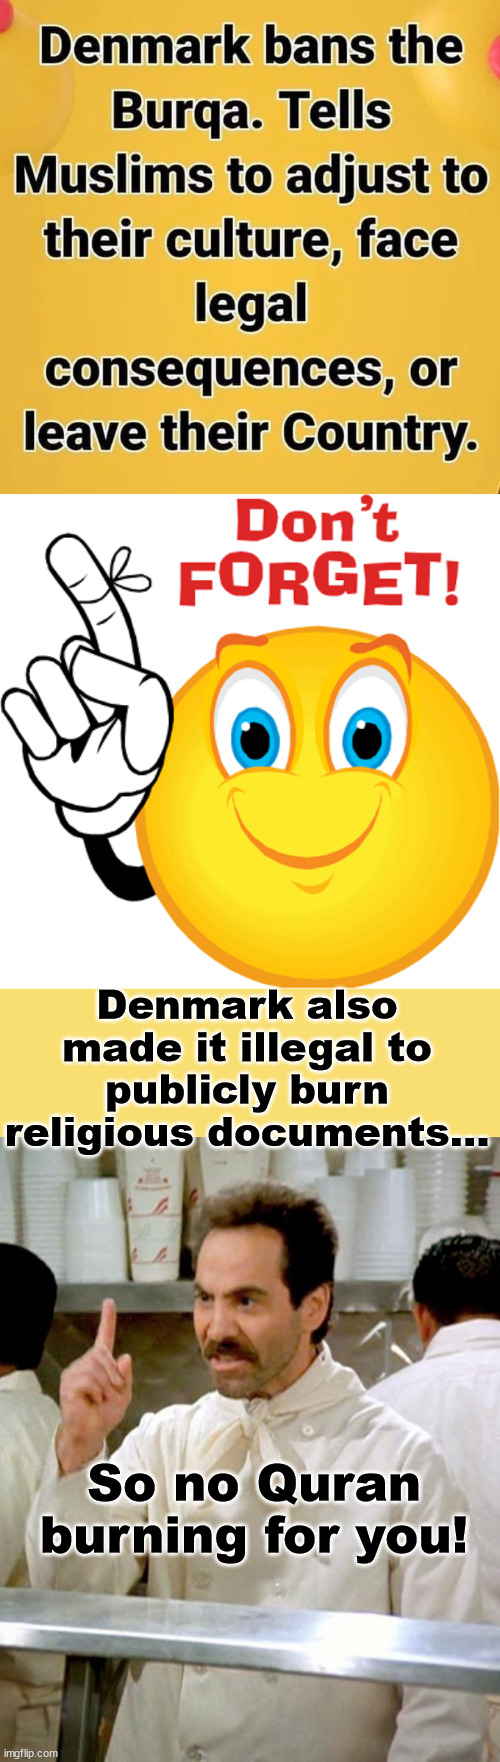 Denmark | Denmark also made it illegal to publicly burn religious documents... So no Quran burning for you! | image tagged in don't forget,denmark,laws | made w/ Imgflip meme maker